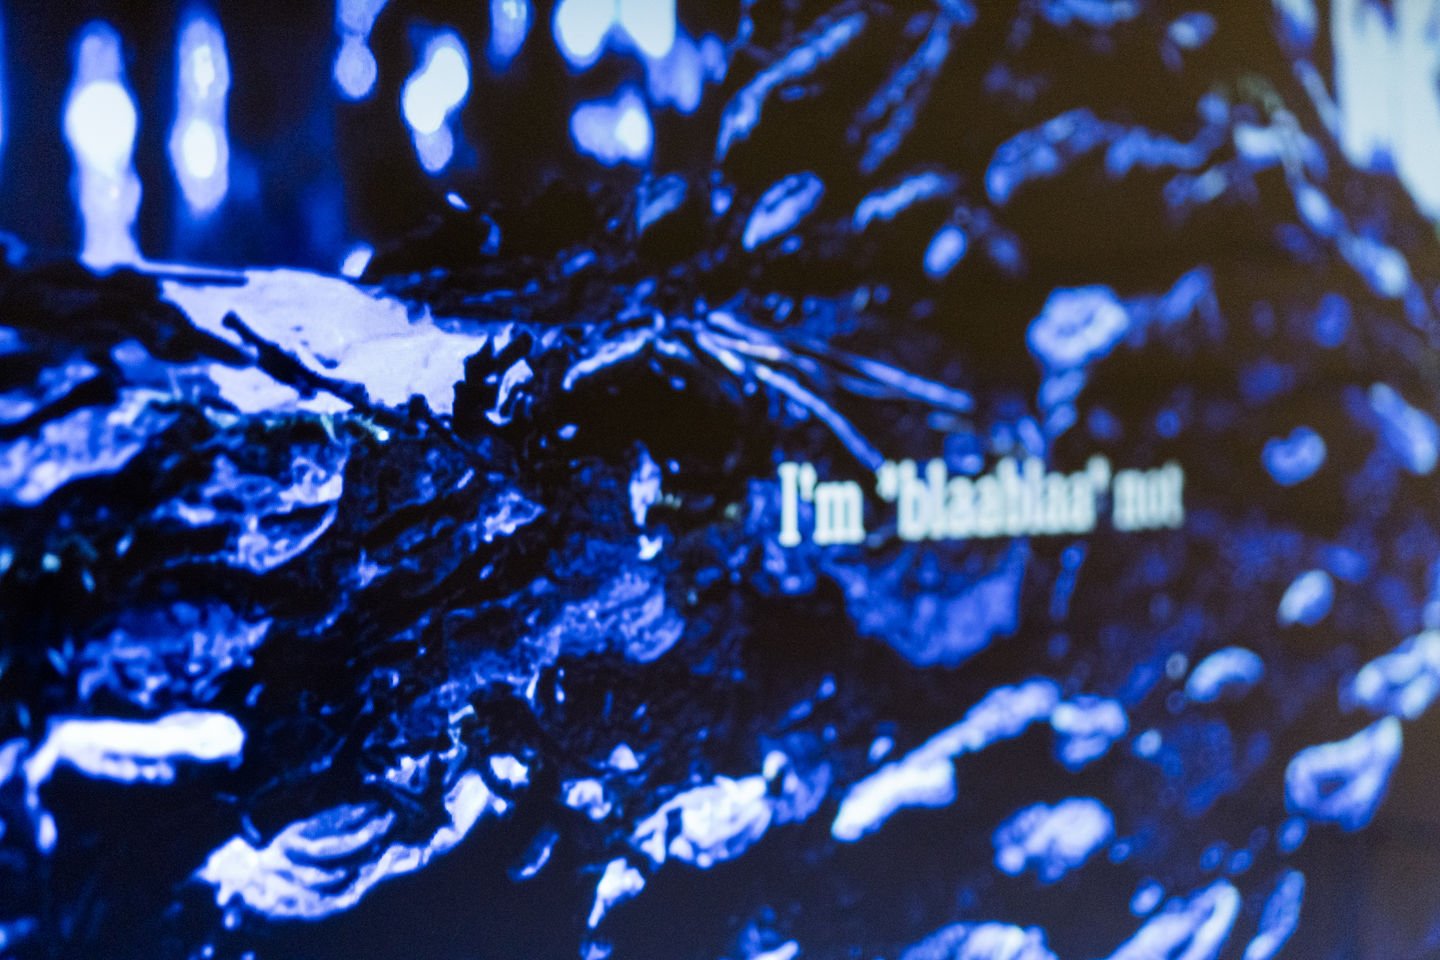 Close up of a digital piece showing swirls of blue and some fictional text laid over the top